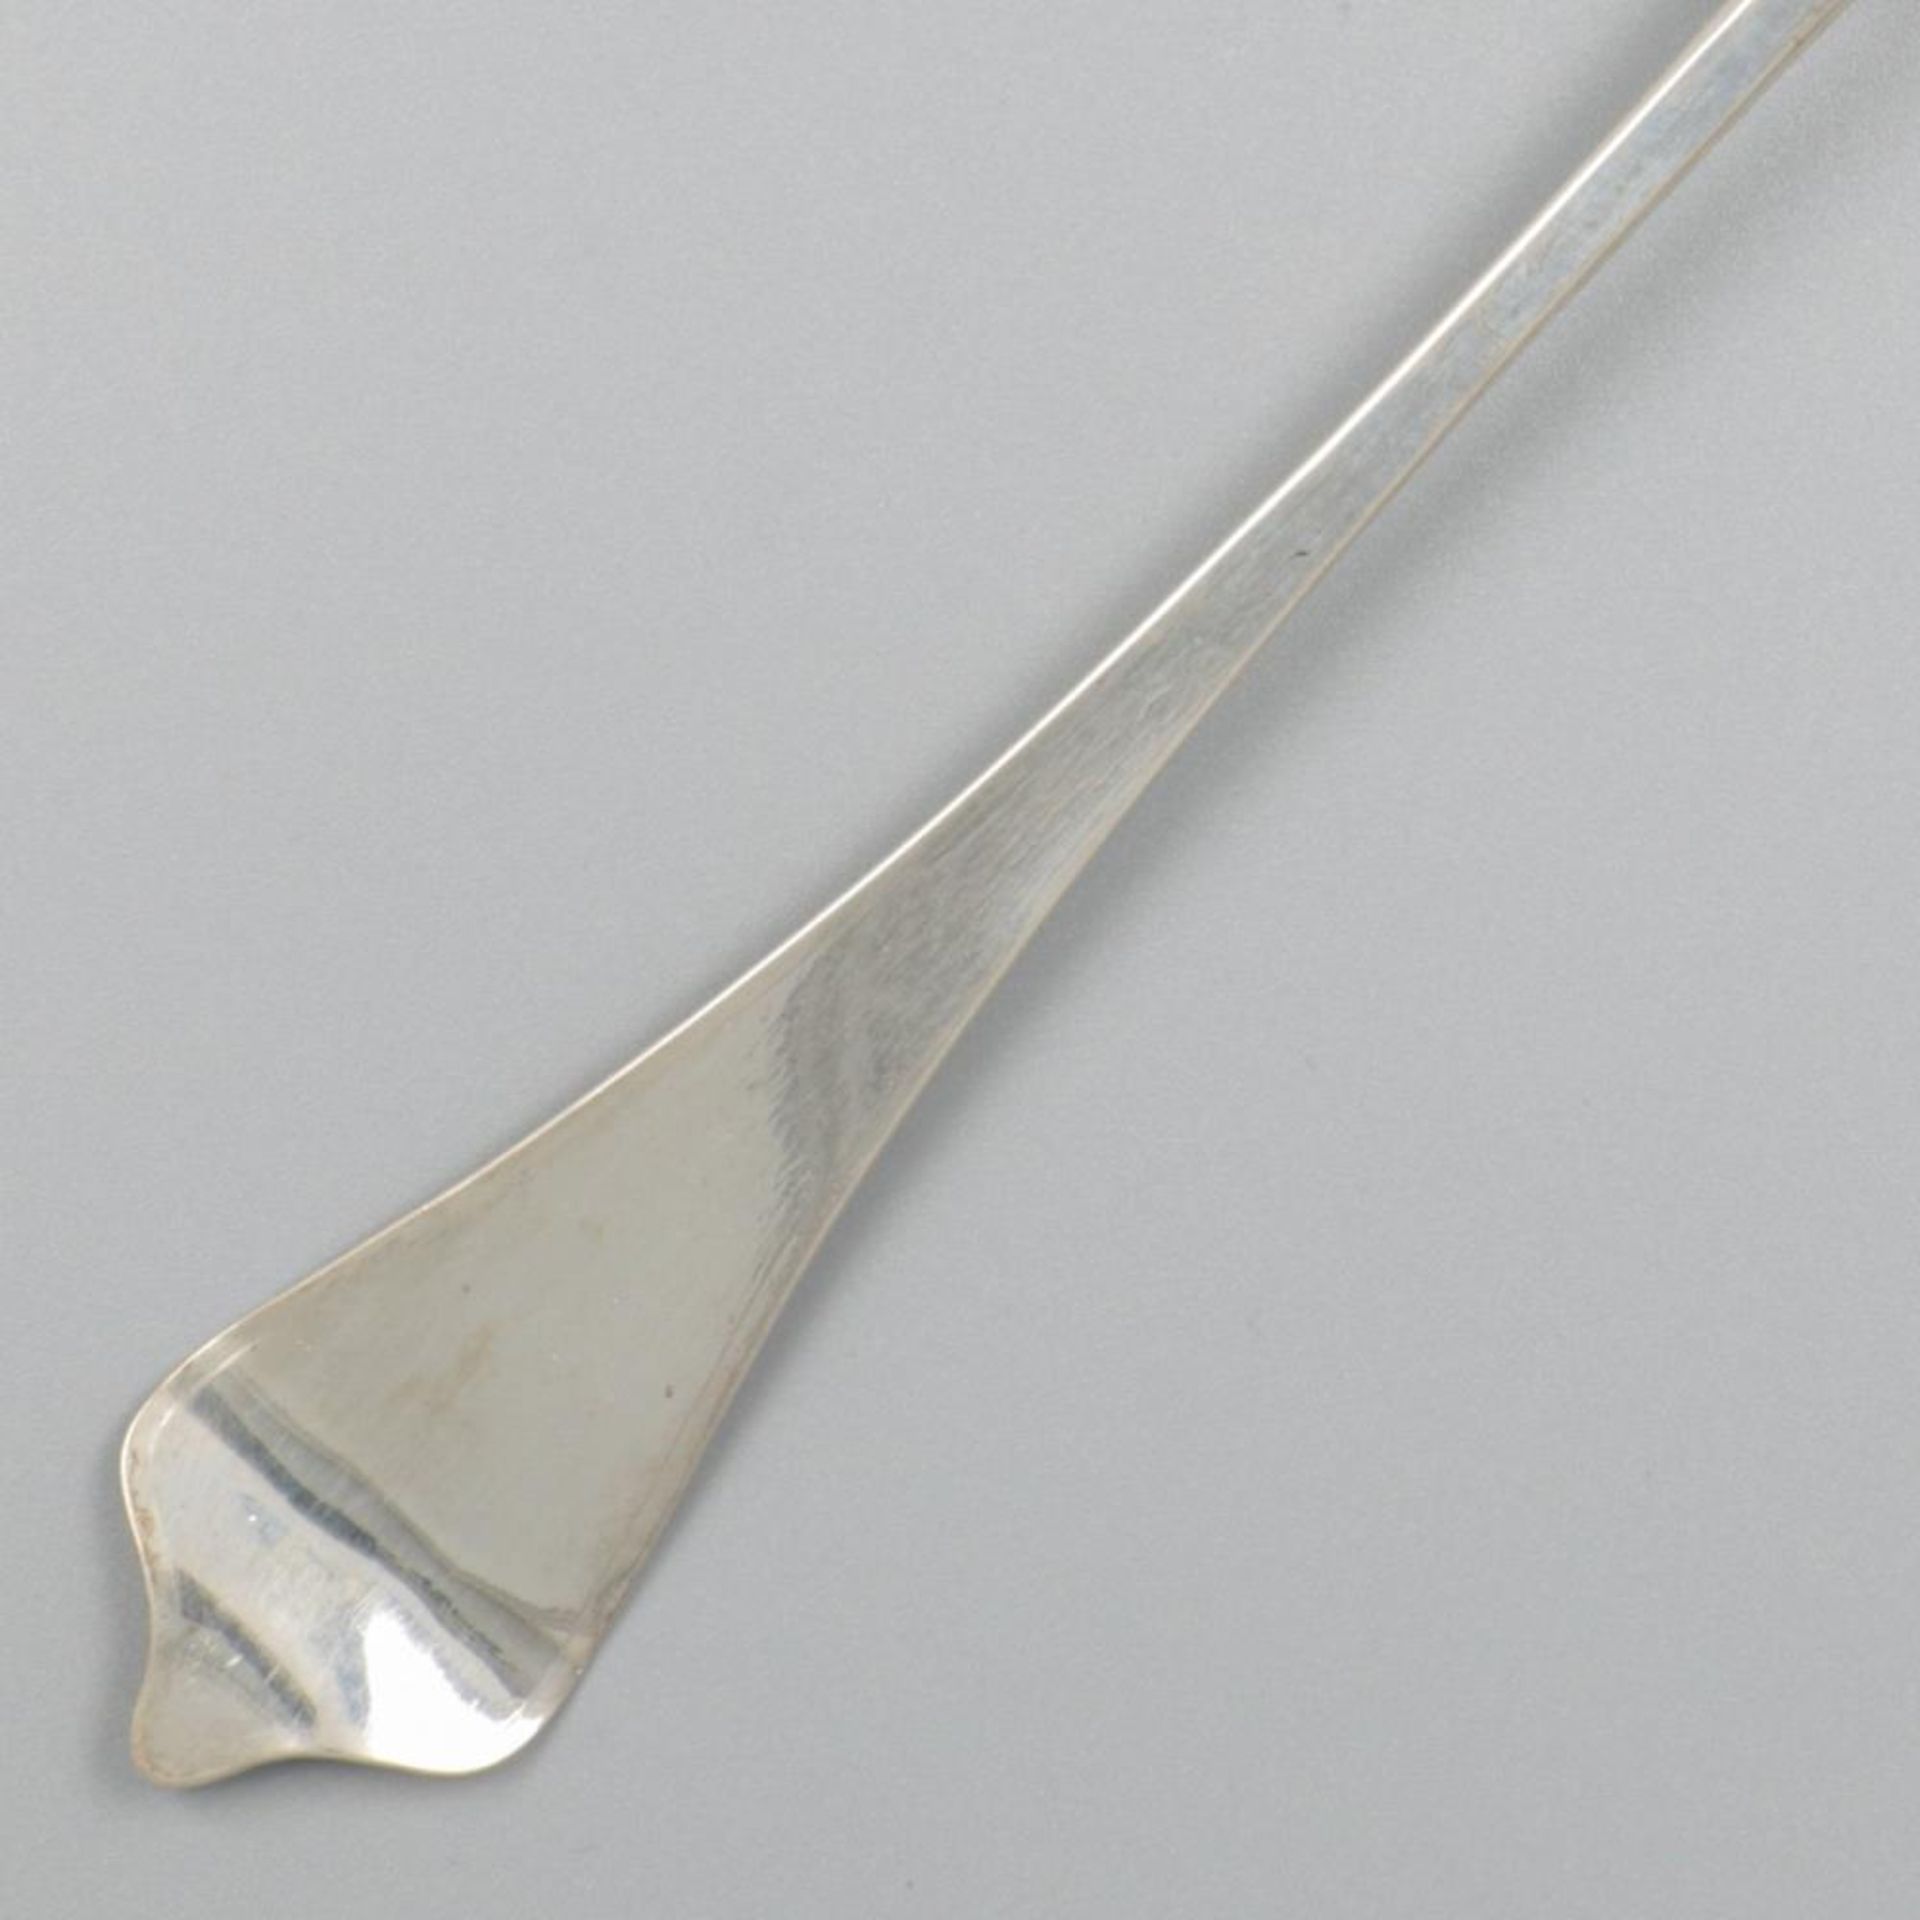 Spoon (Netherlands 18th century) silver. - Image 2 of 6